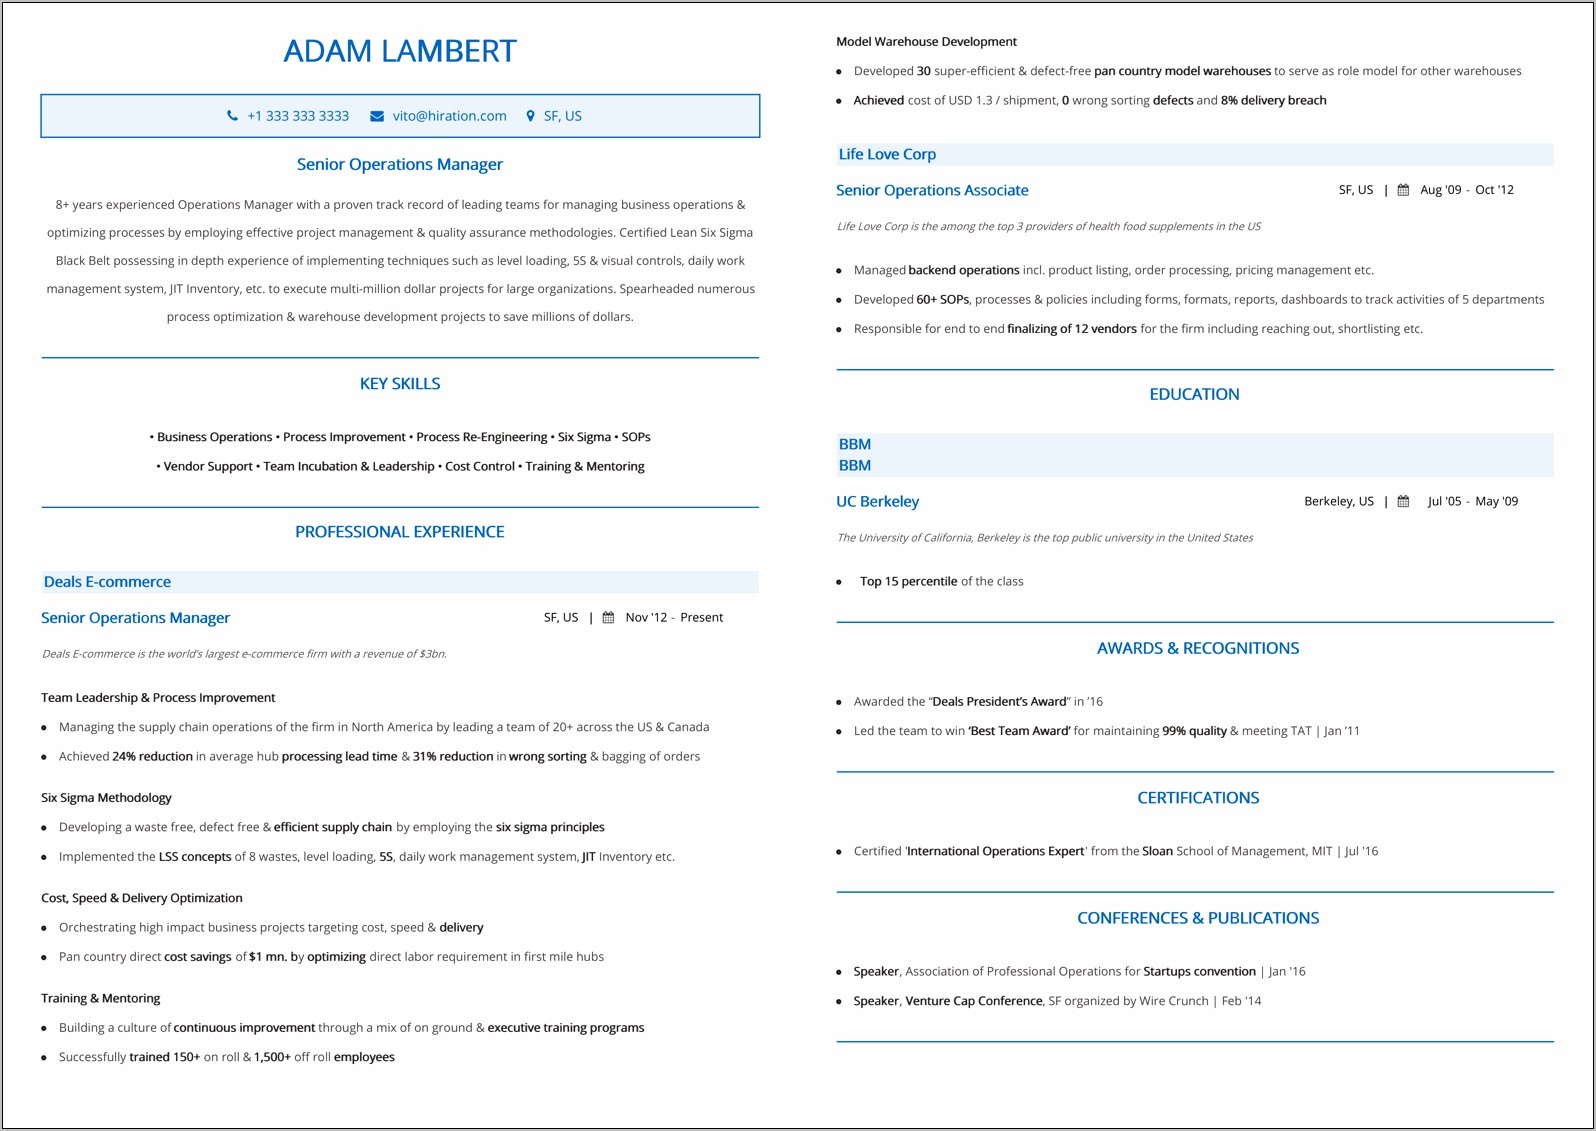 Sample Resume For Ecommerce Operations Manager